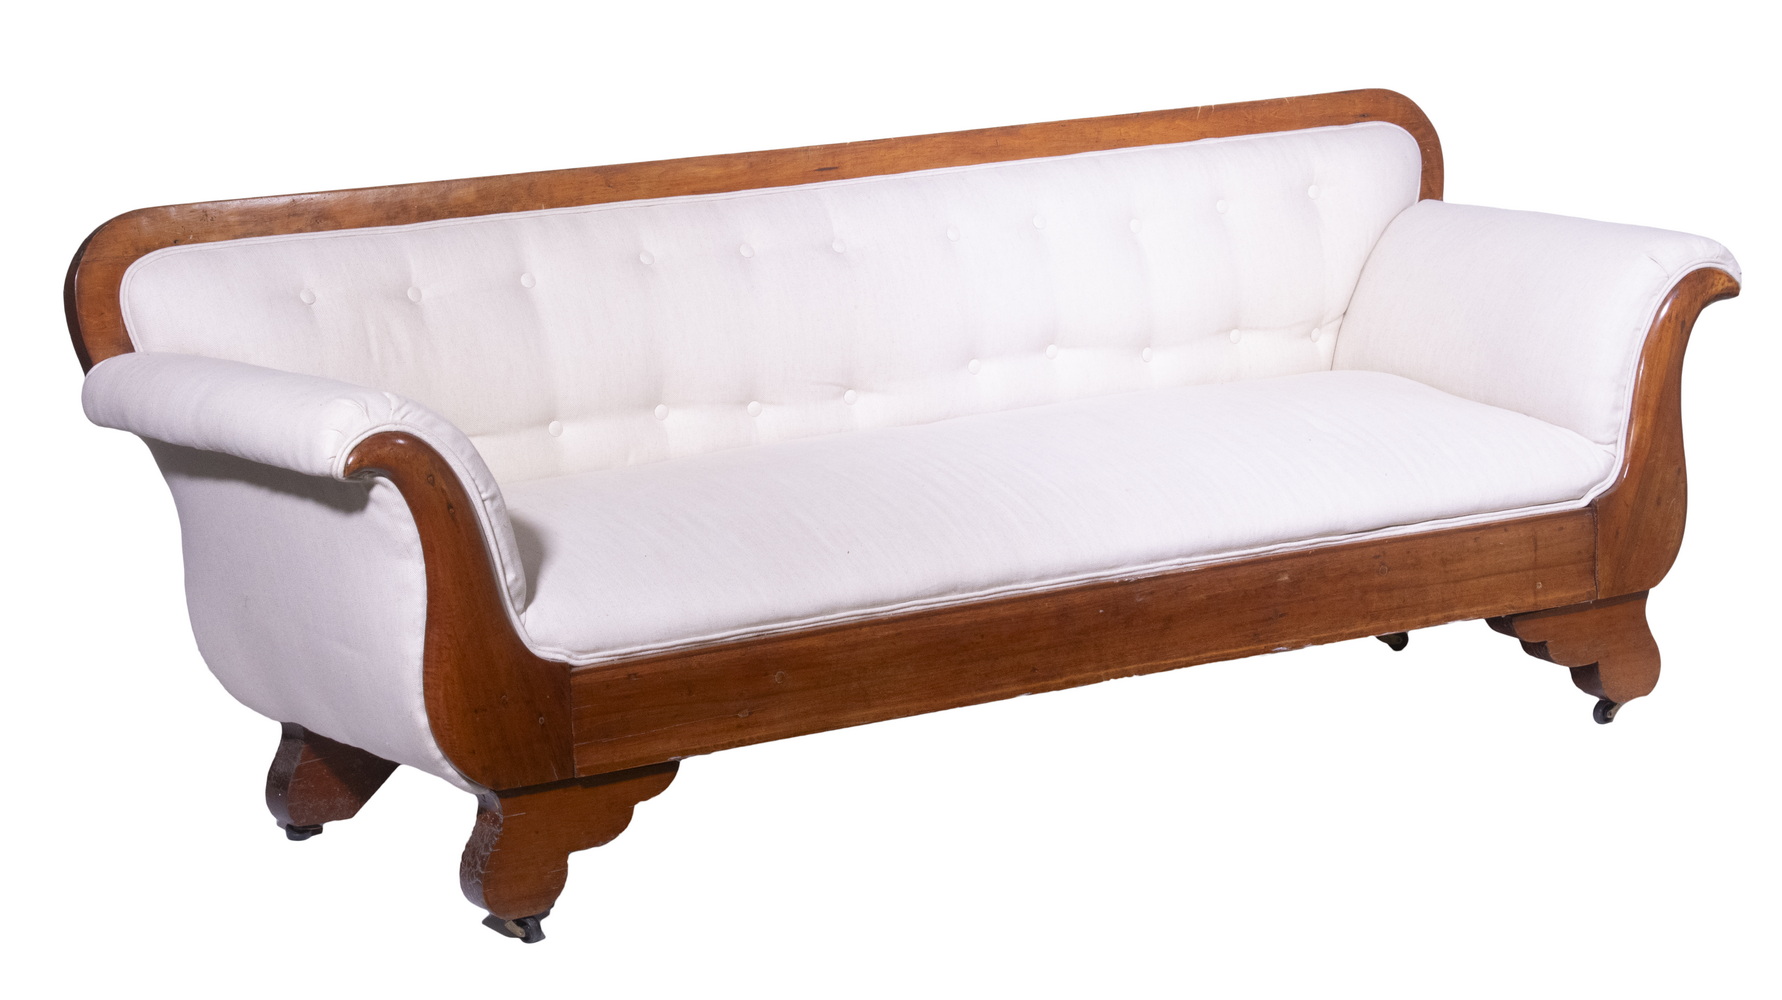 EMPIRE SOFA 19th C Settee with 3b6764